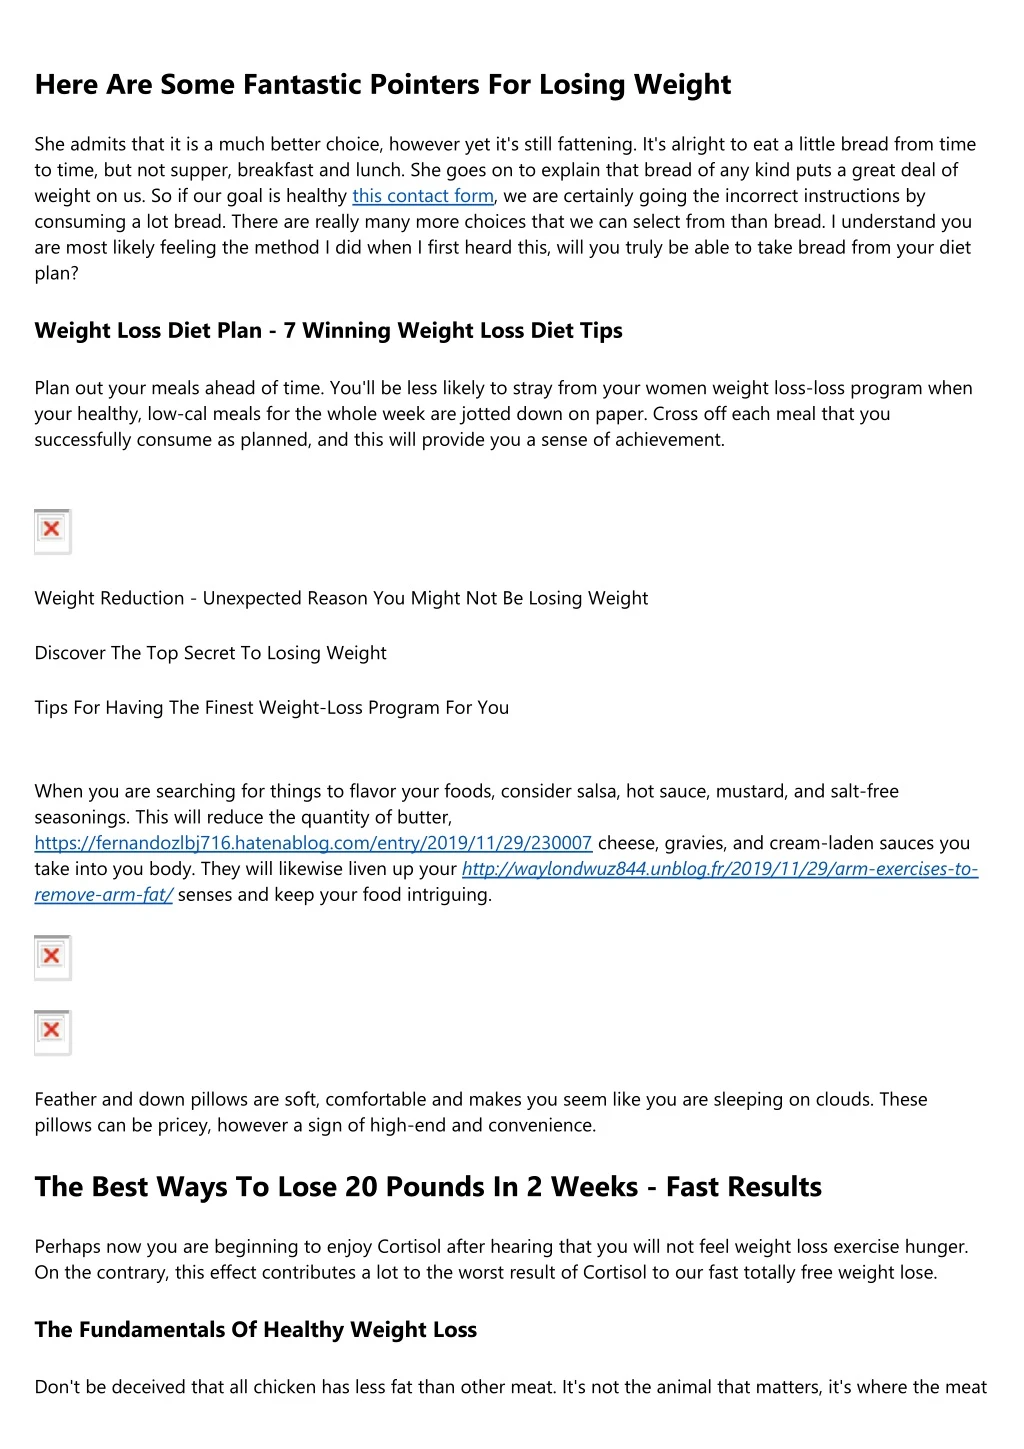 here are some fantastic pointers for losing weight